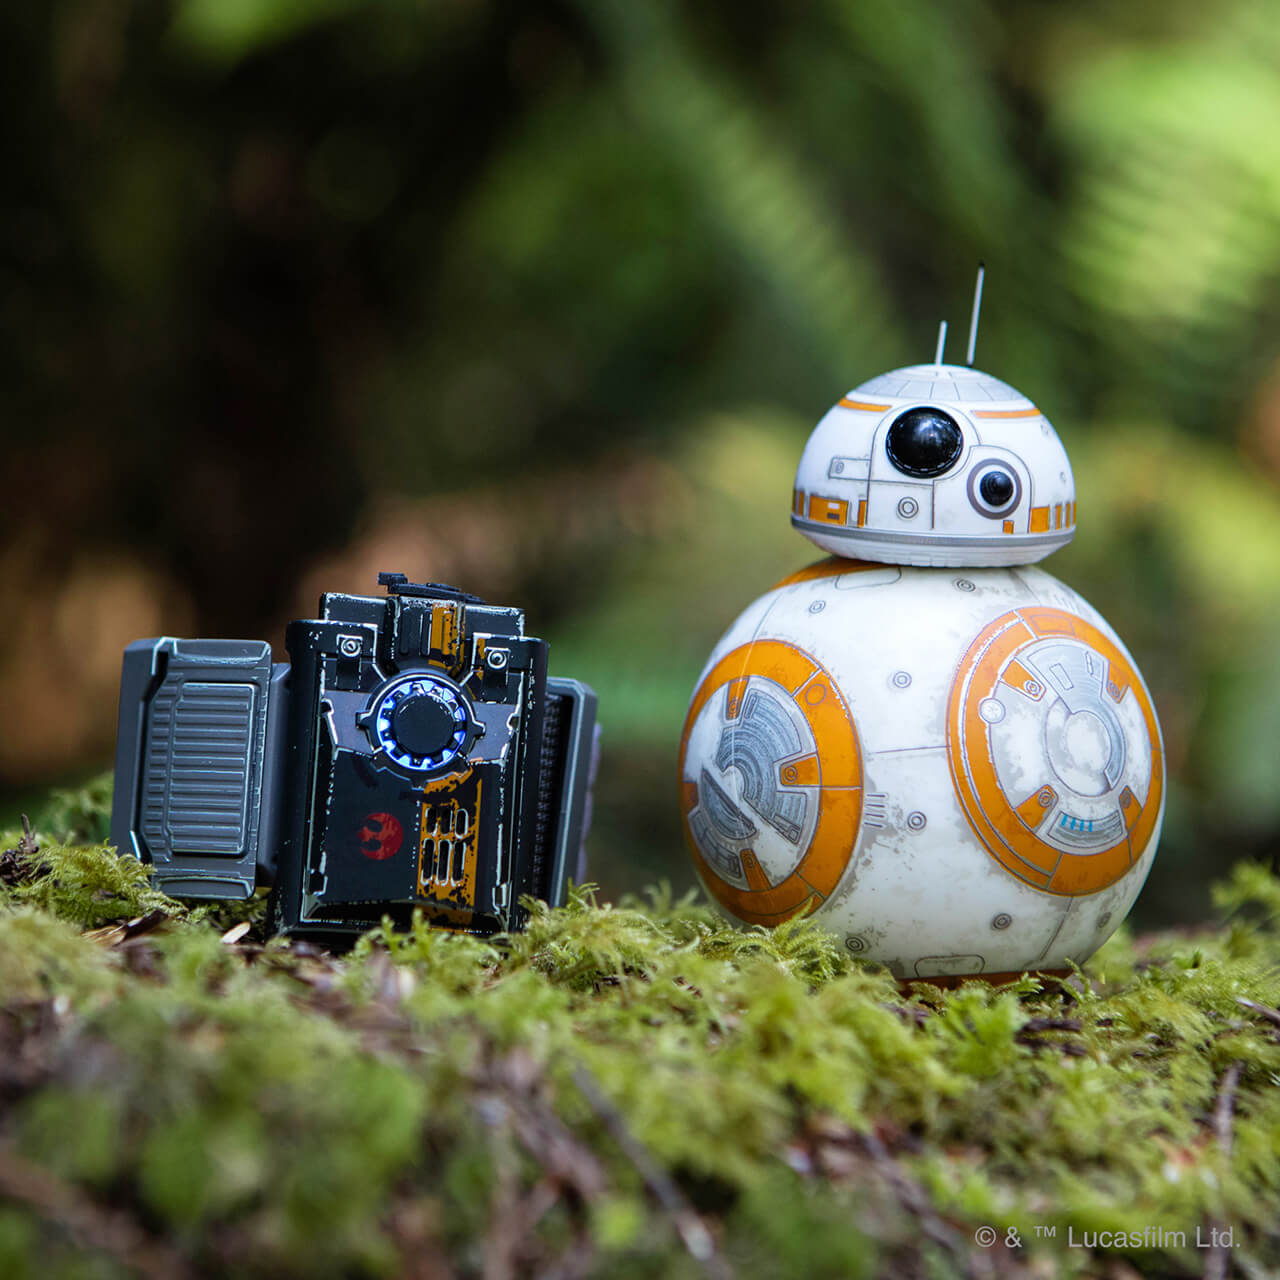 Sphero® Special Edition BB-8™ Battle-Worn with Force Band™